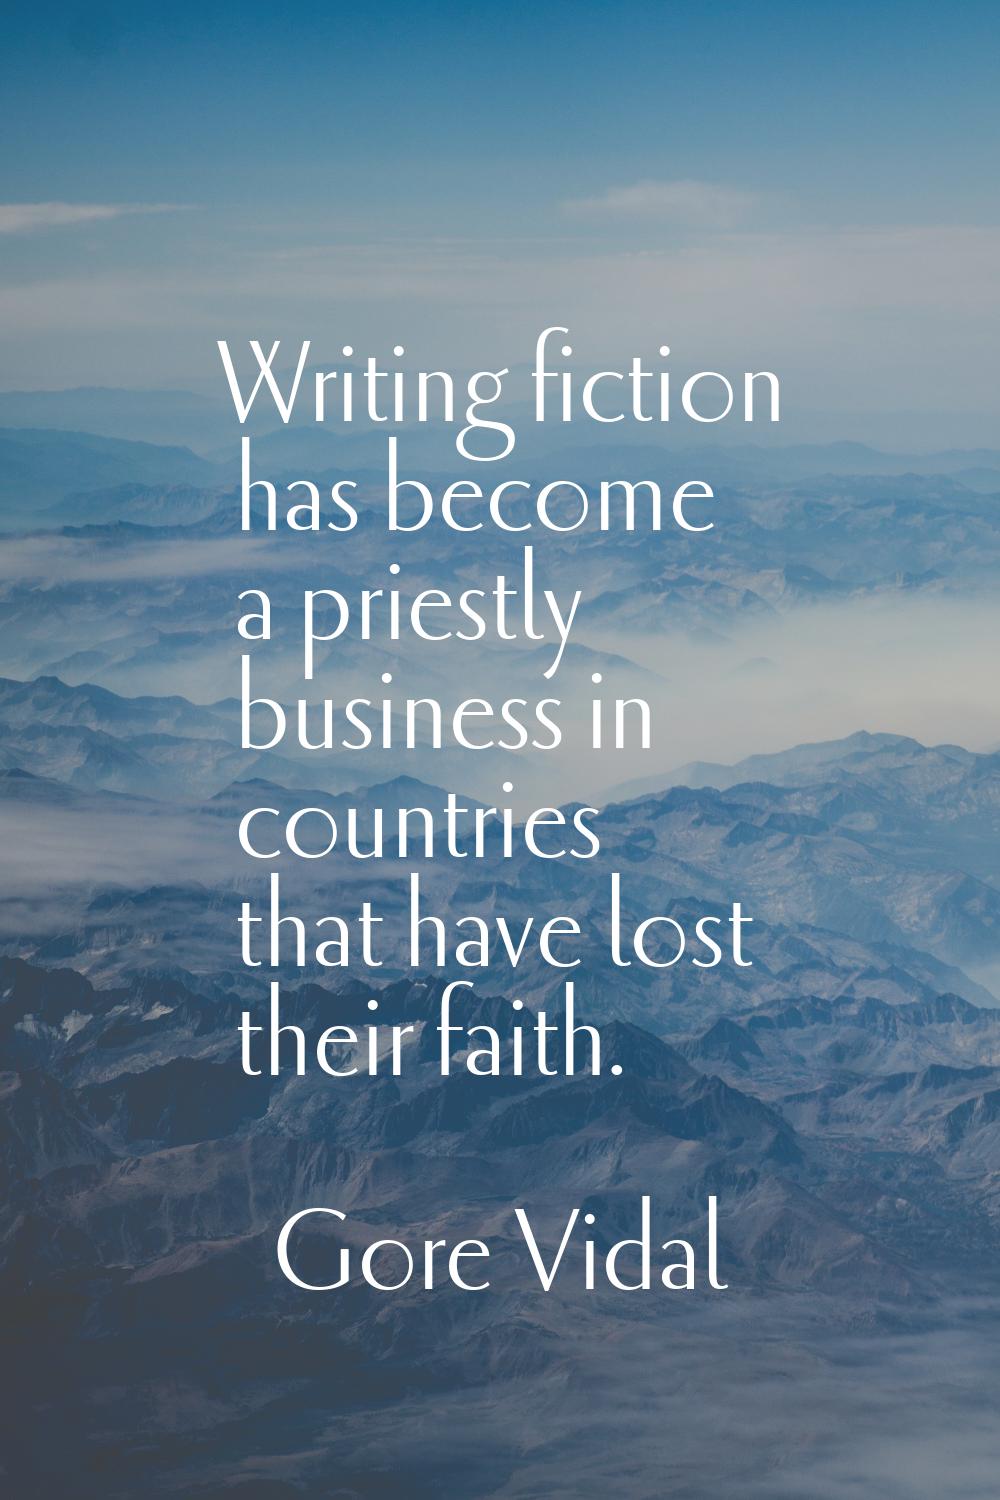 Writing fiction has become a priestly business in countries that have lost their faith.